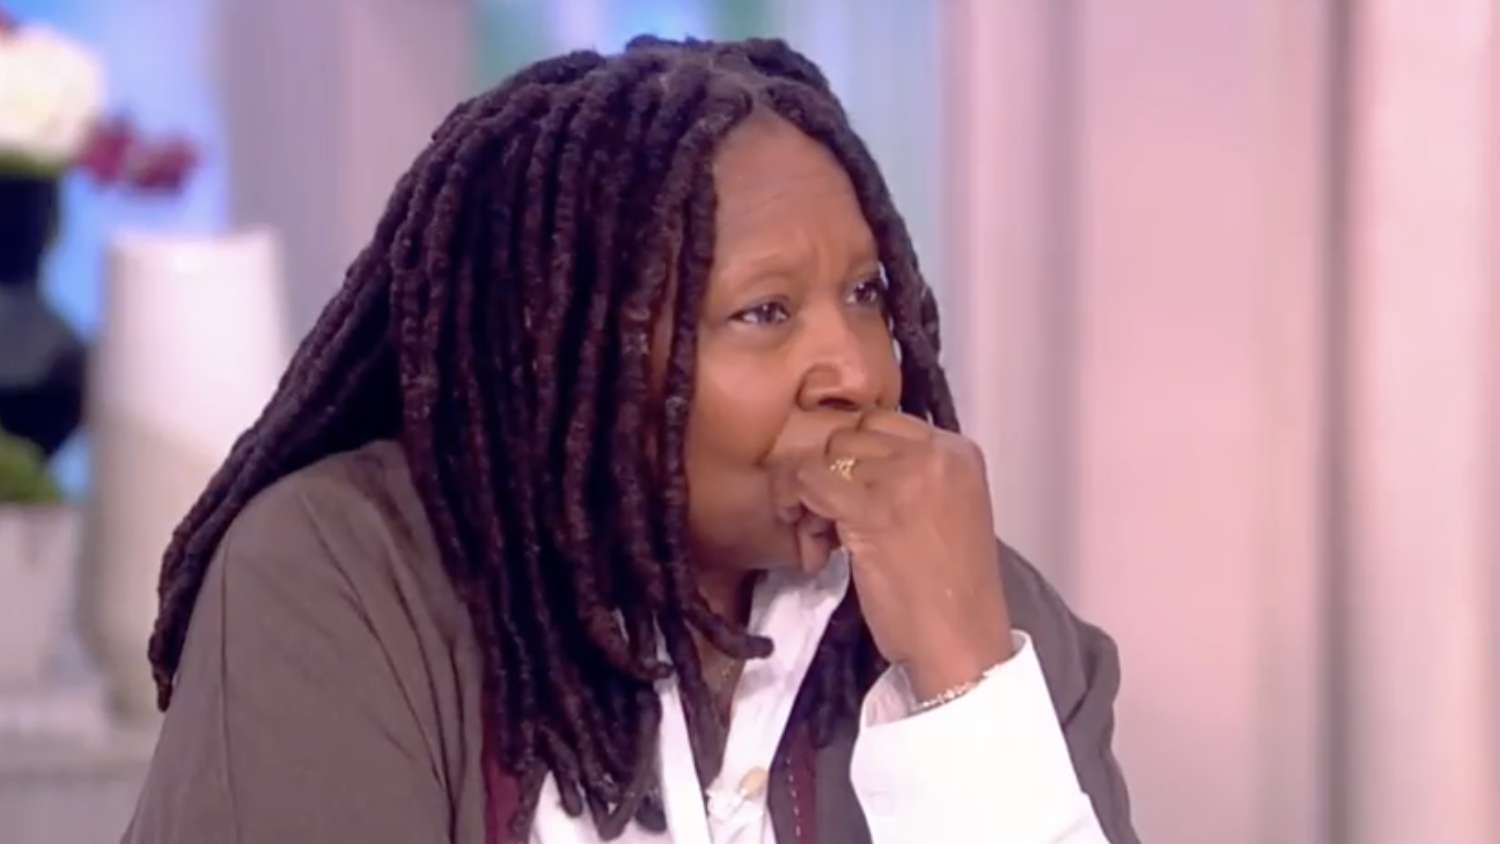 Whoopi Goldberg Makes Guest Break Down In Tears On Live Broadcast of ‘The View’